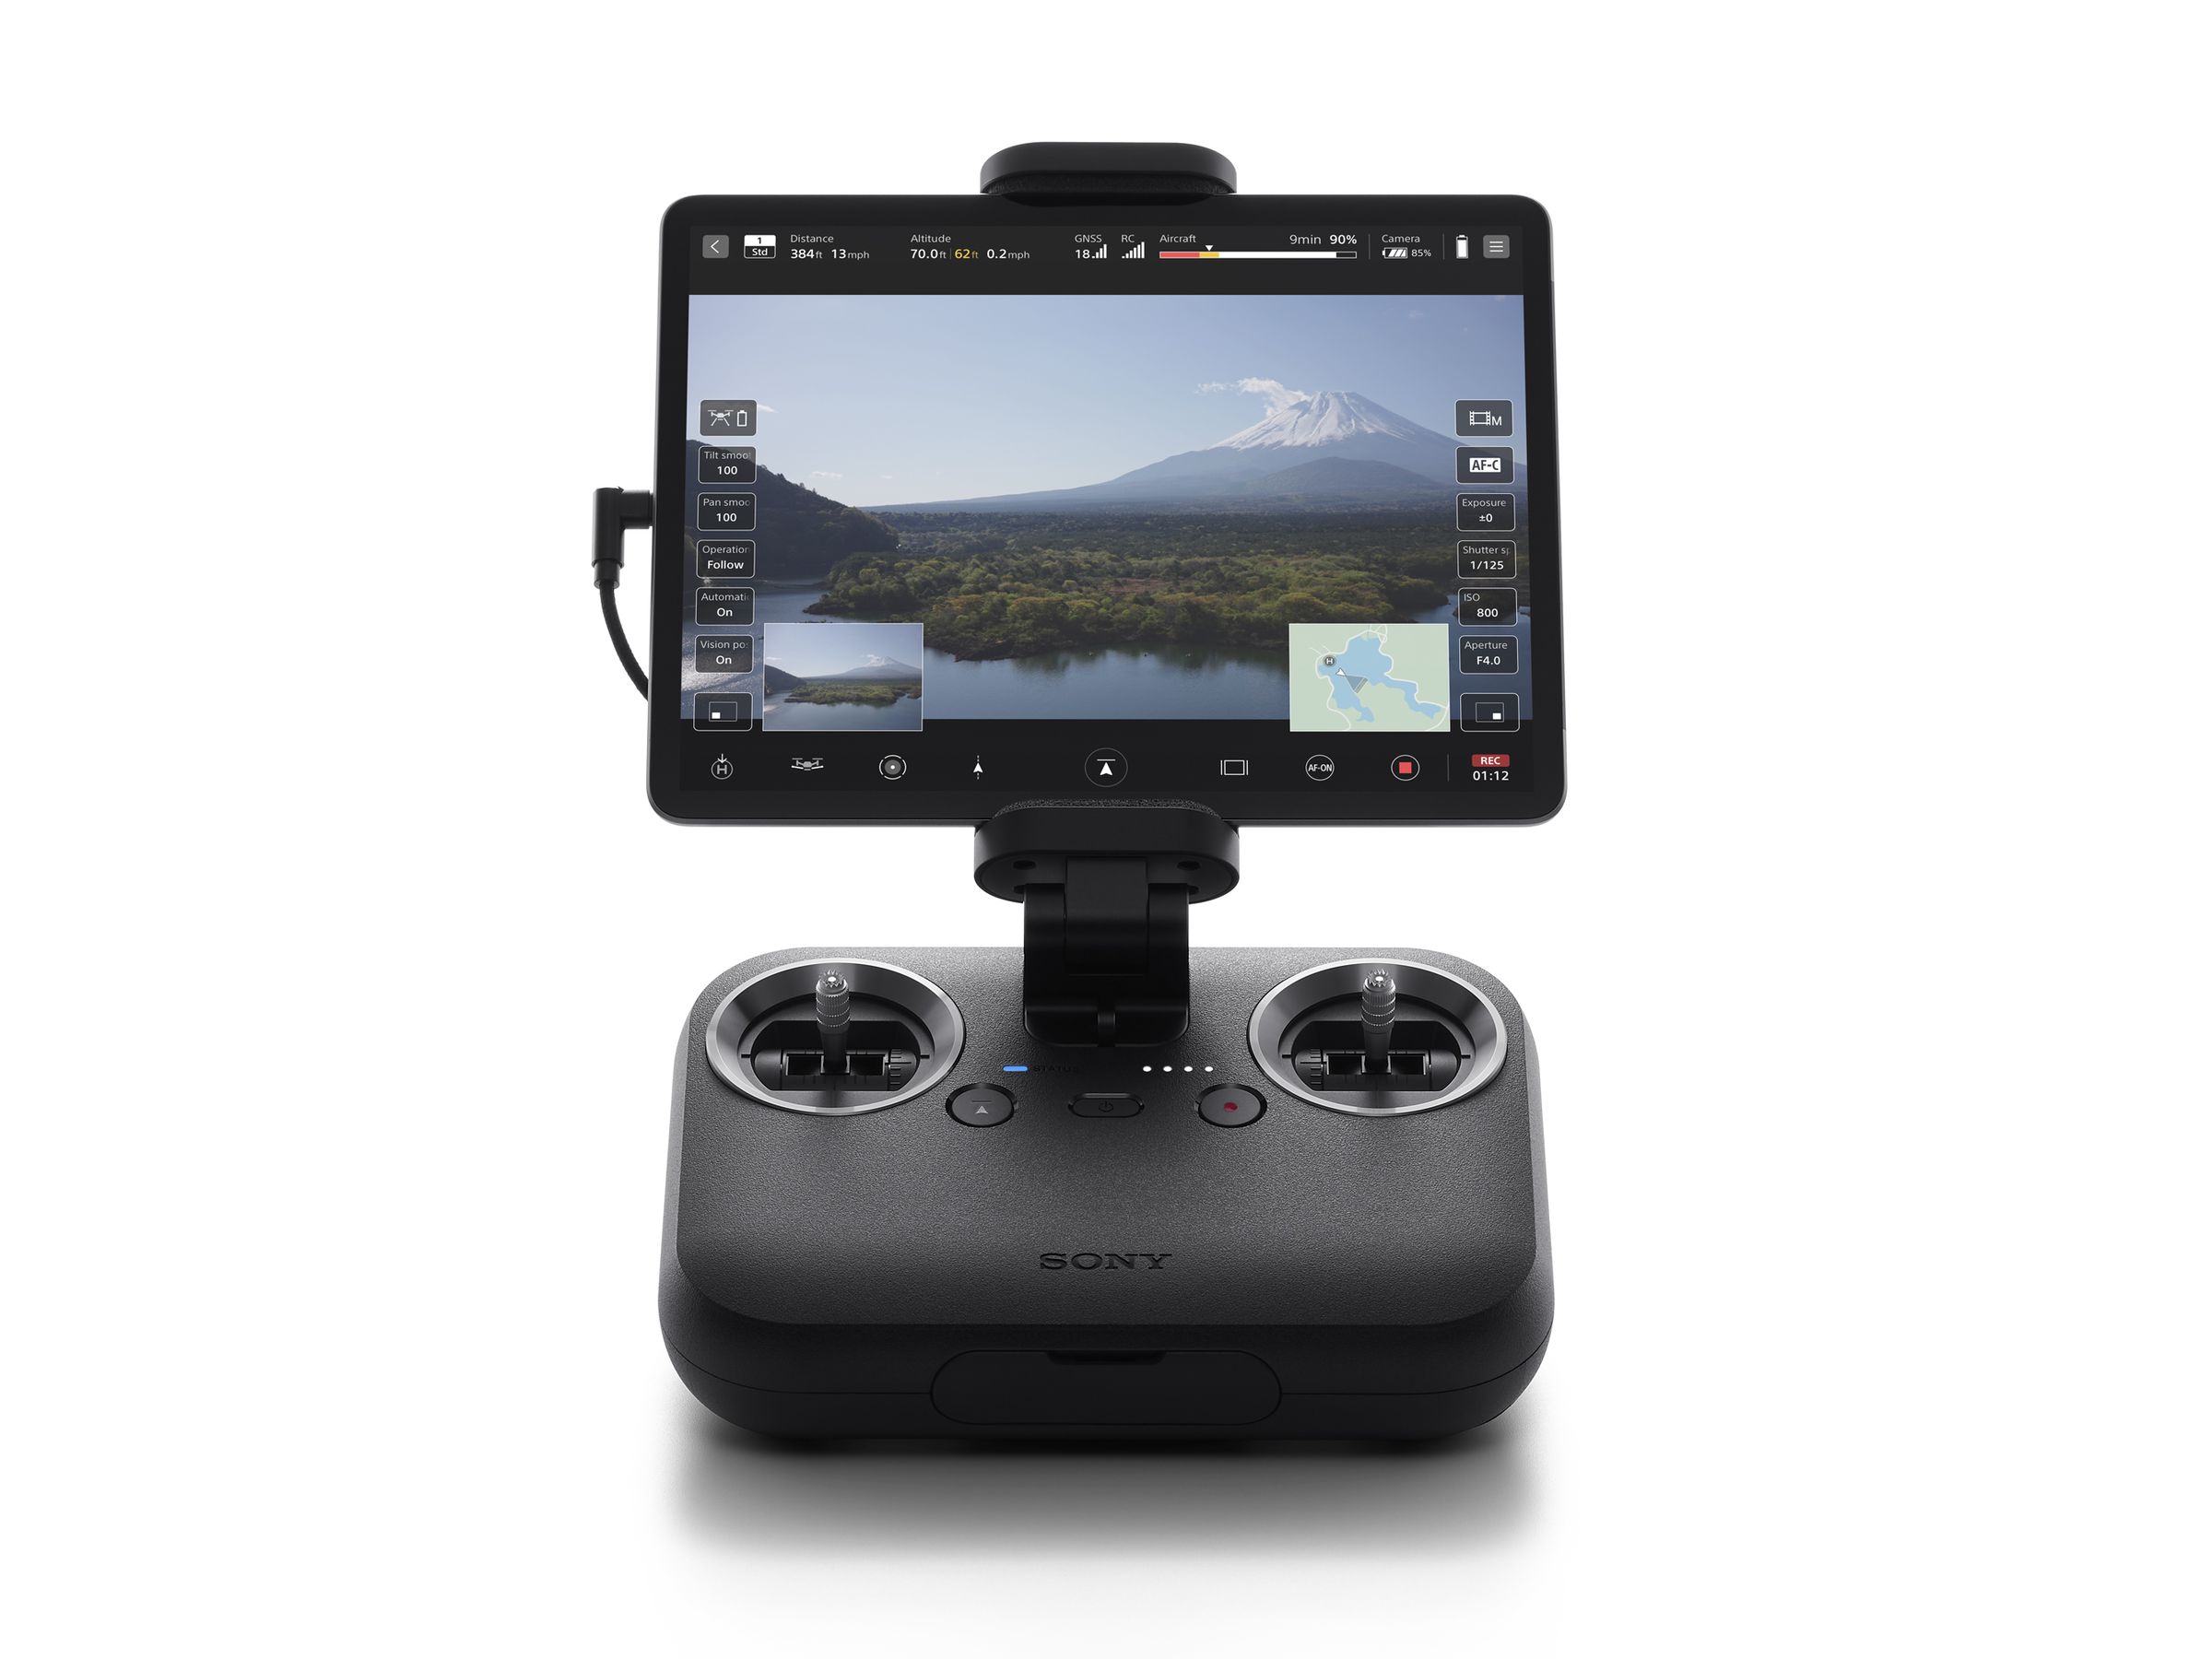 The controller with an iPad running Airpeak Flight.